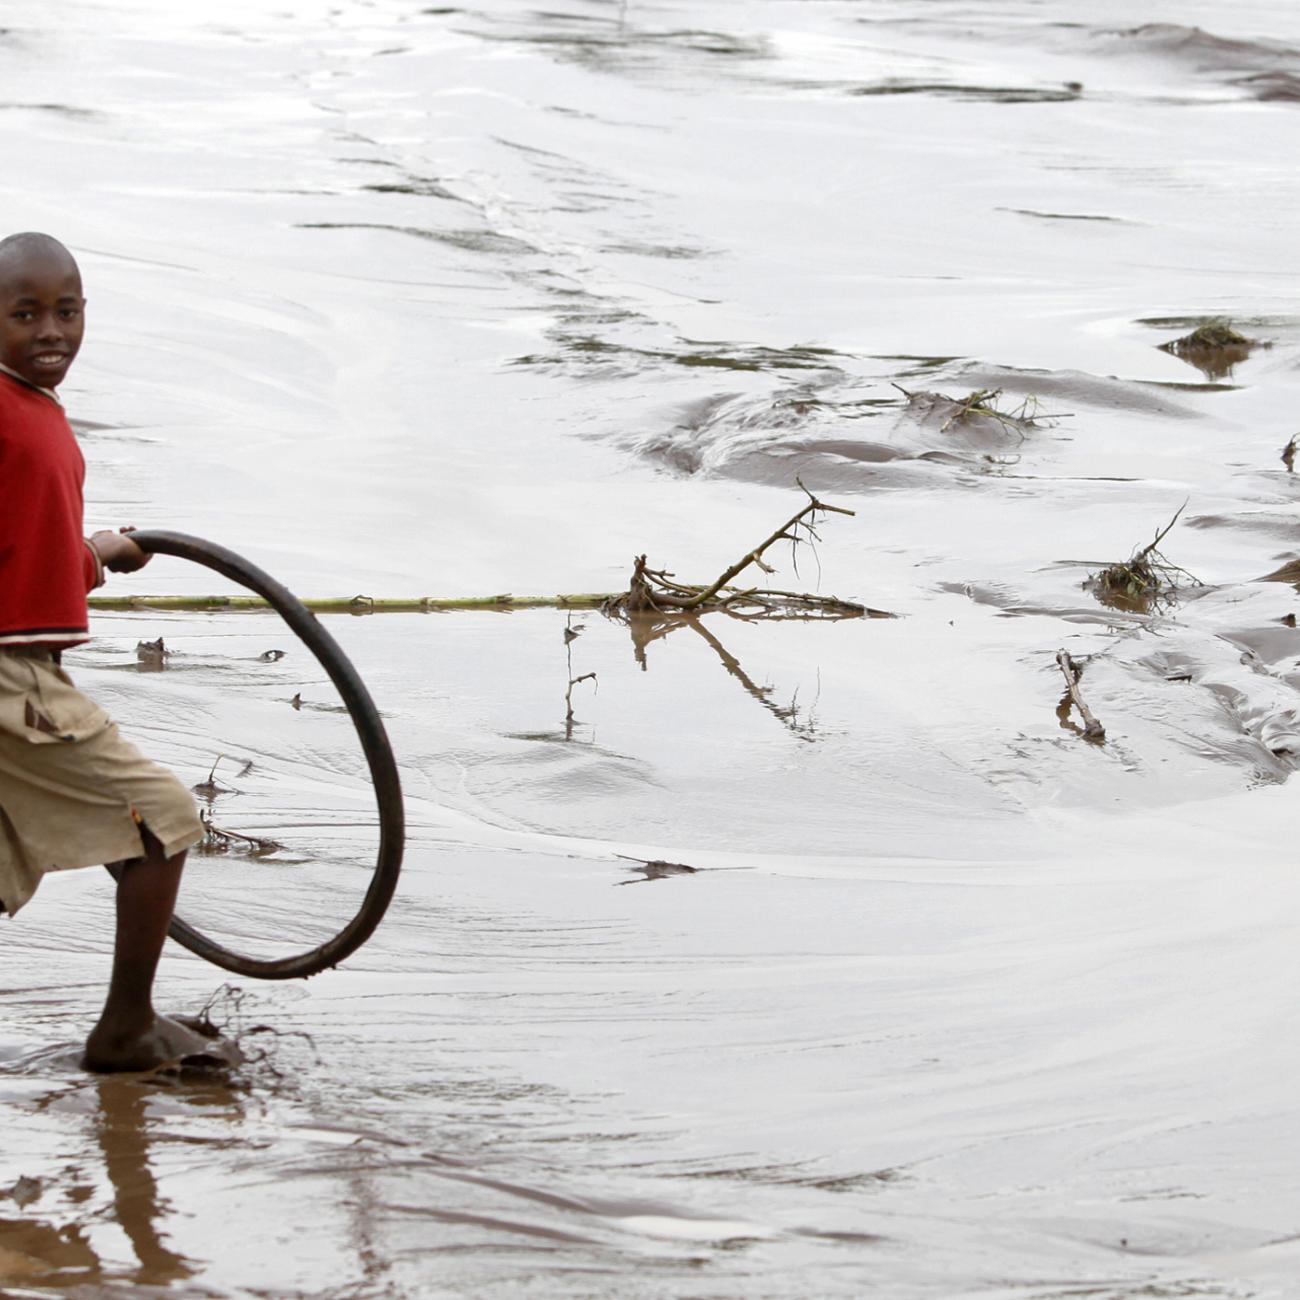 A boy wades through floodwaters after heavy rains in Bududa village.